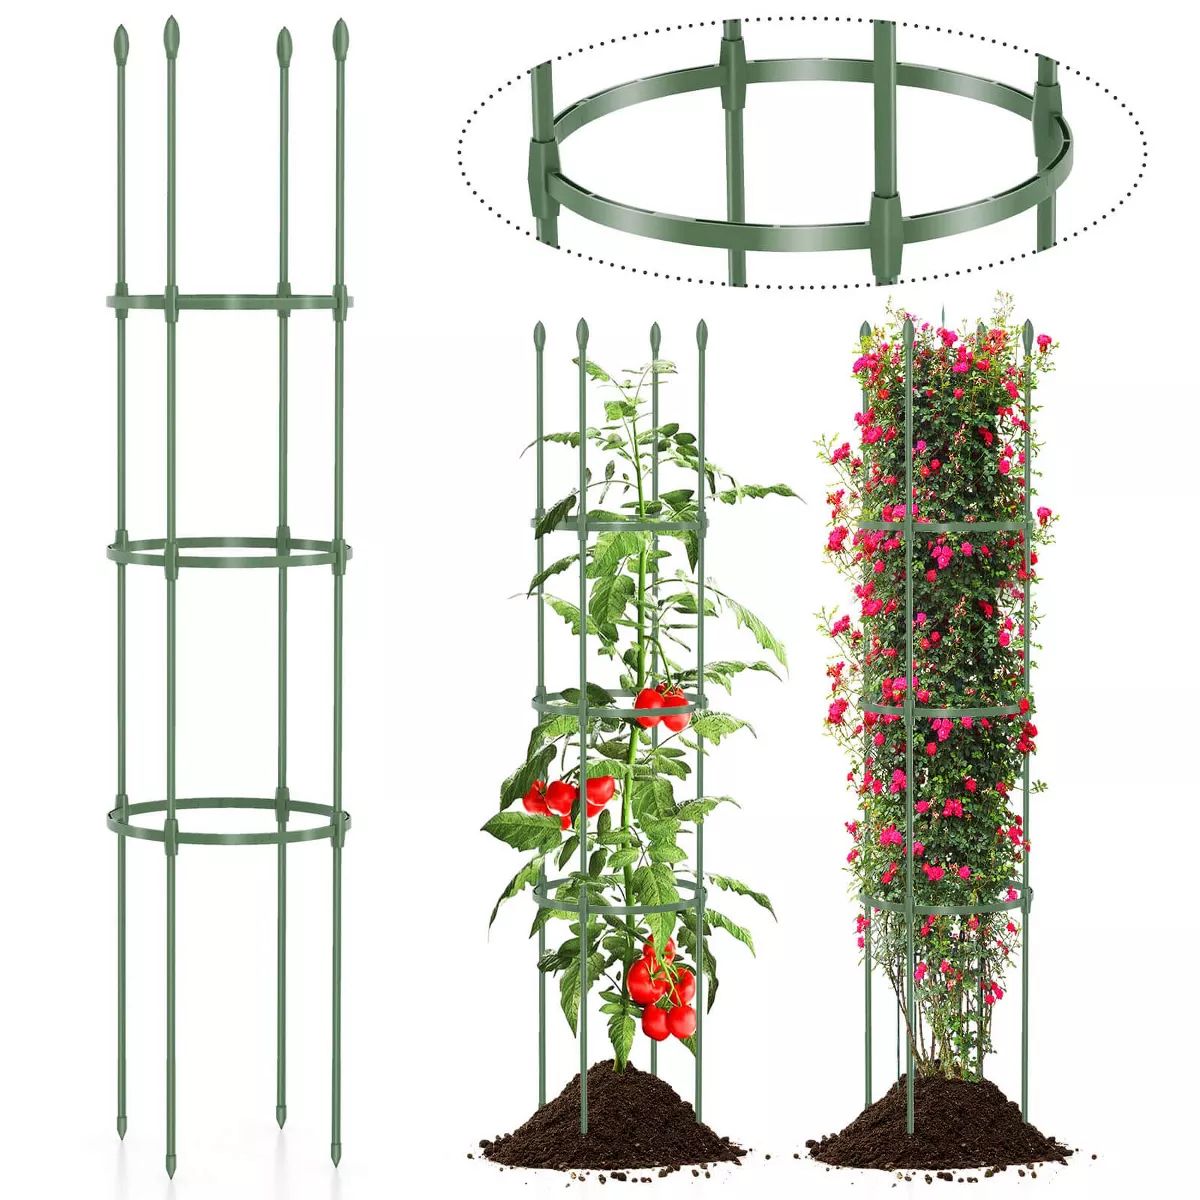 Costway 2-Pack Garden Trellis 56" Plant Support & Tomato Cages with Adjustable Height | Target